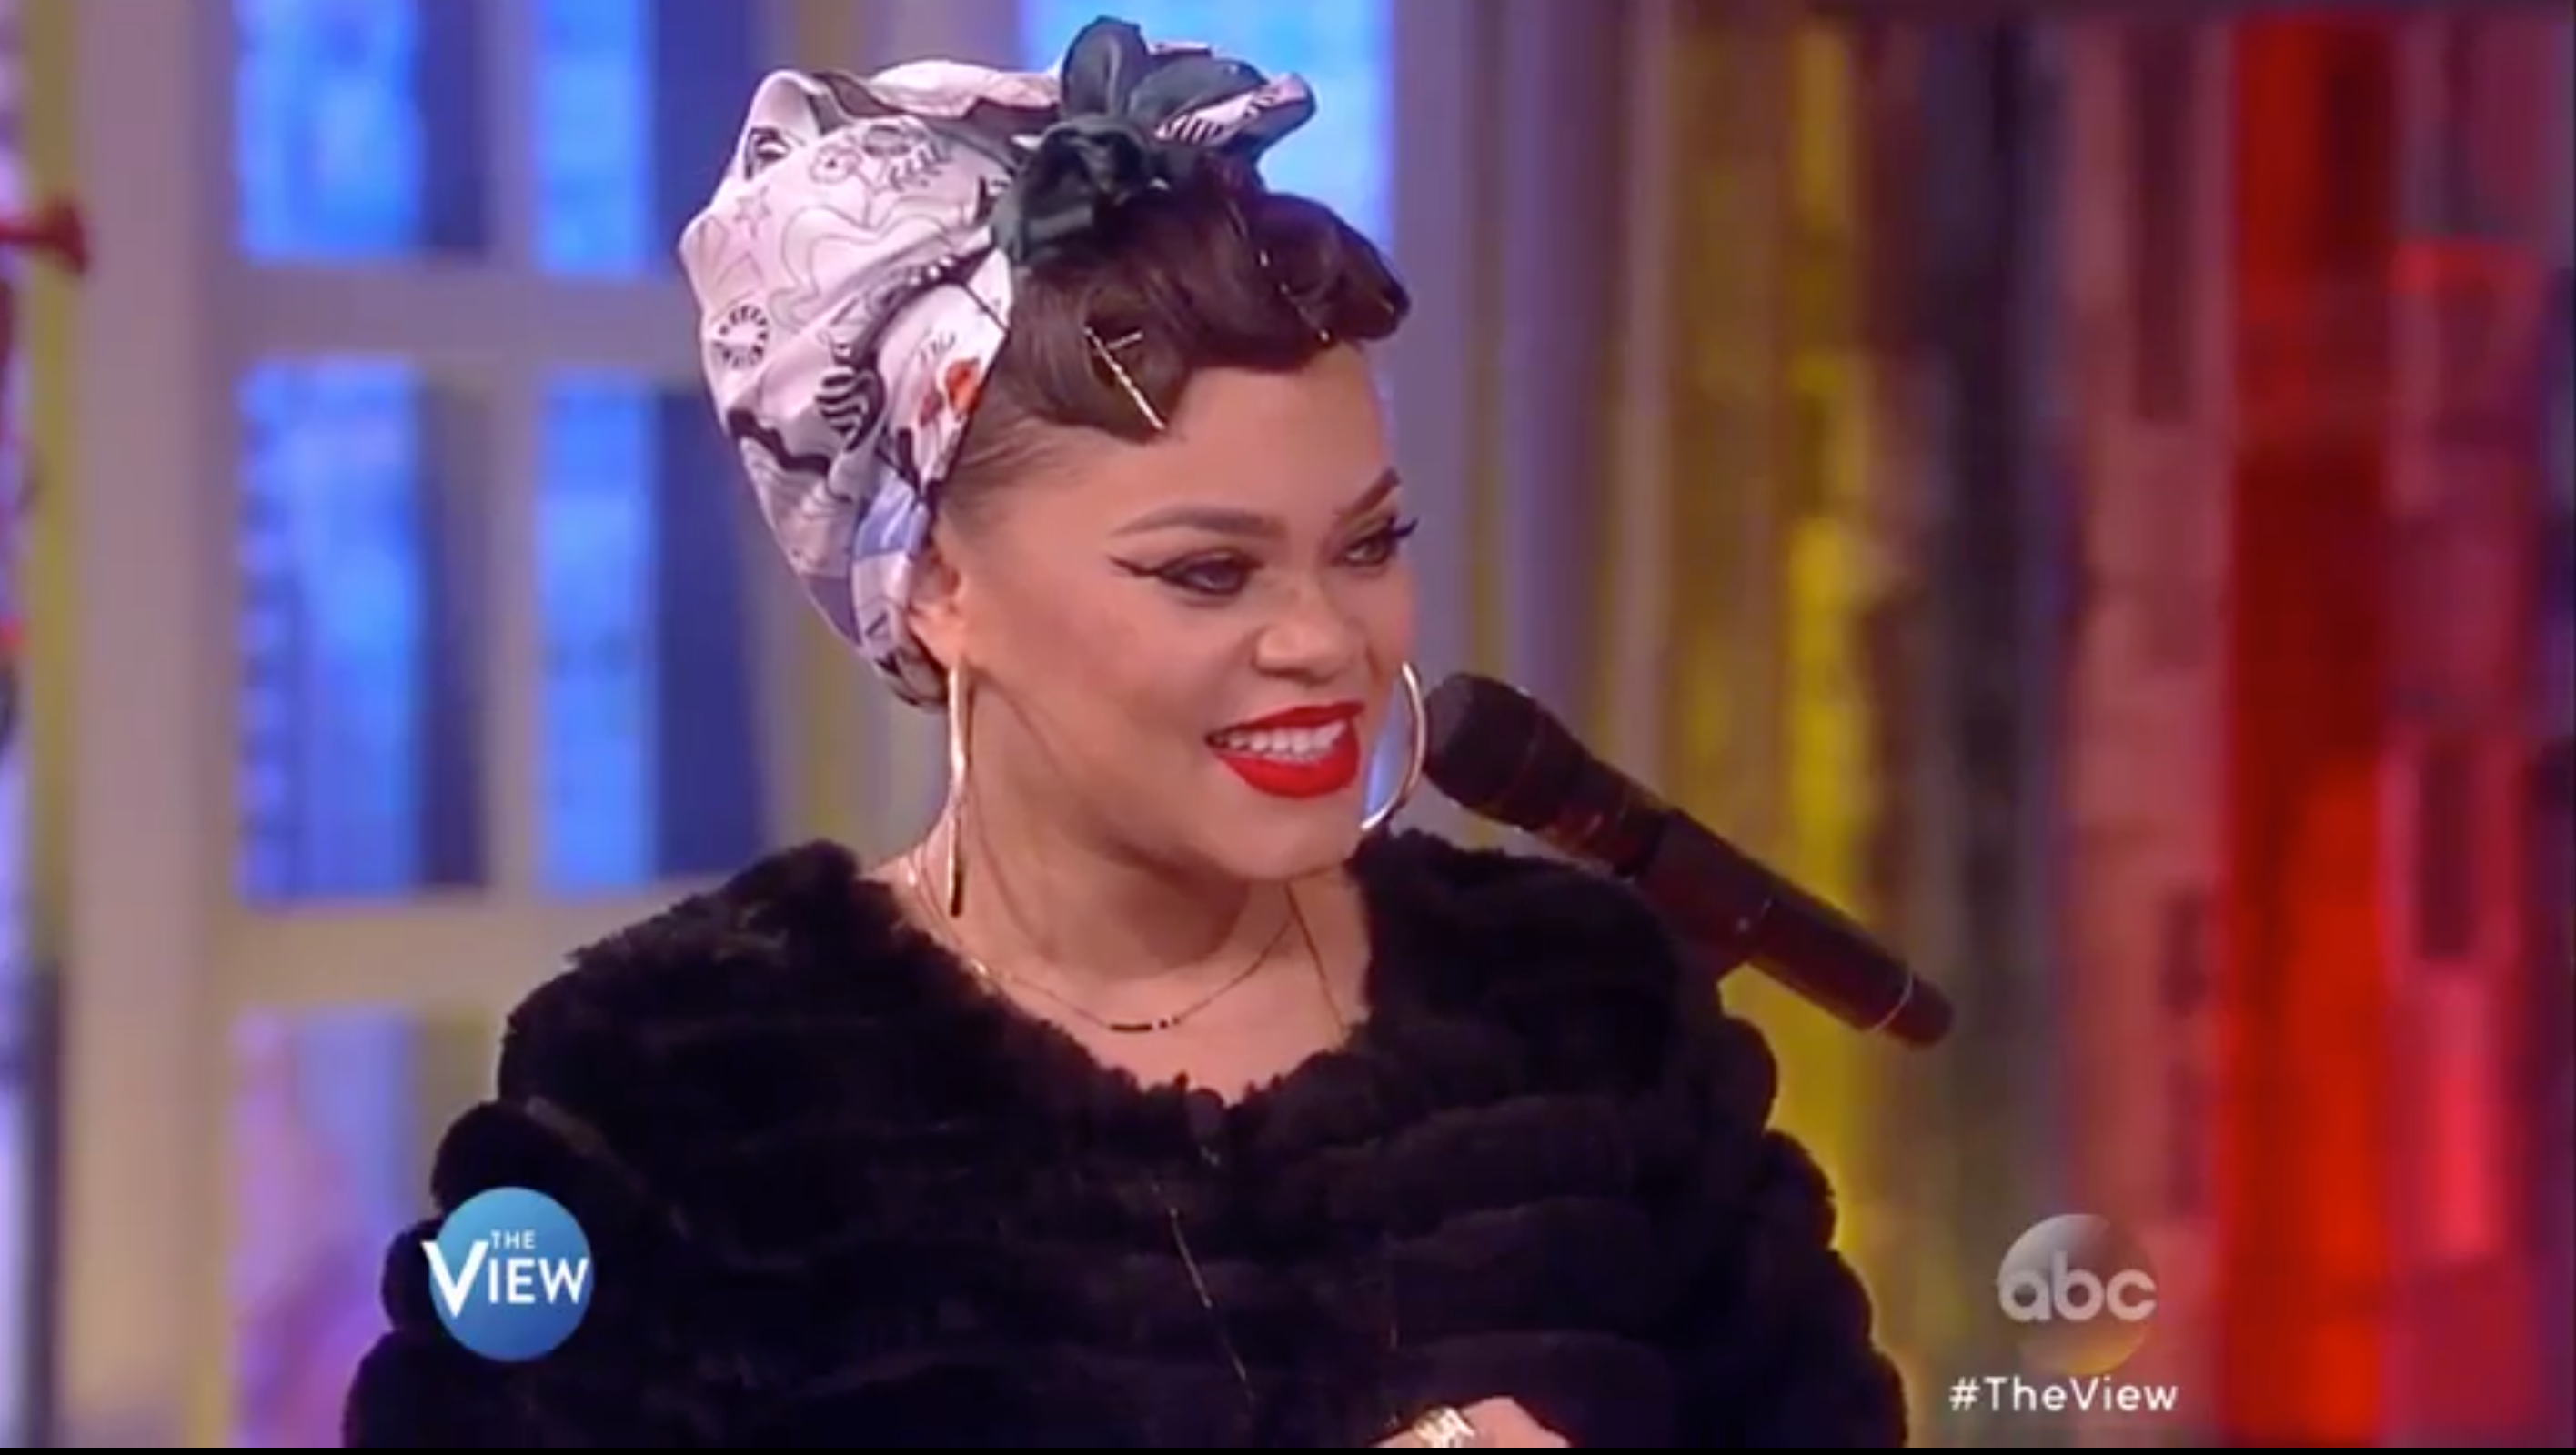 ESSENCE Fest Artist Andra Day Slays 'Rise Up' on The View
